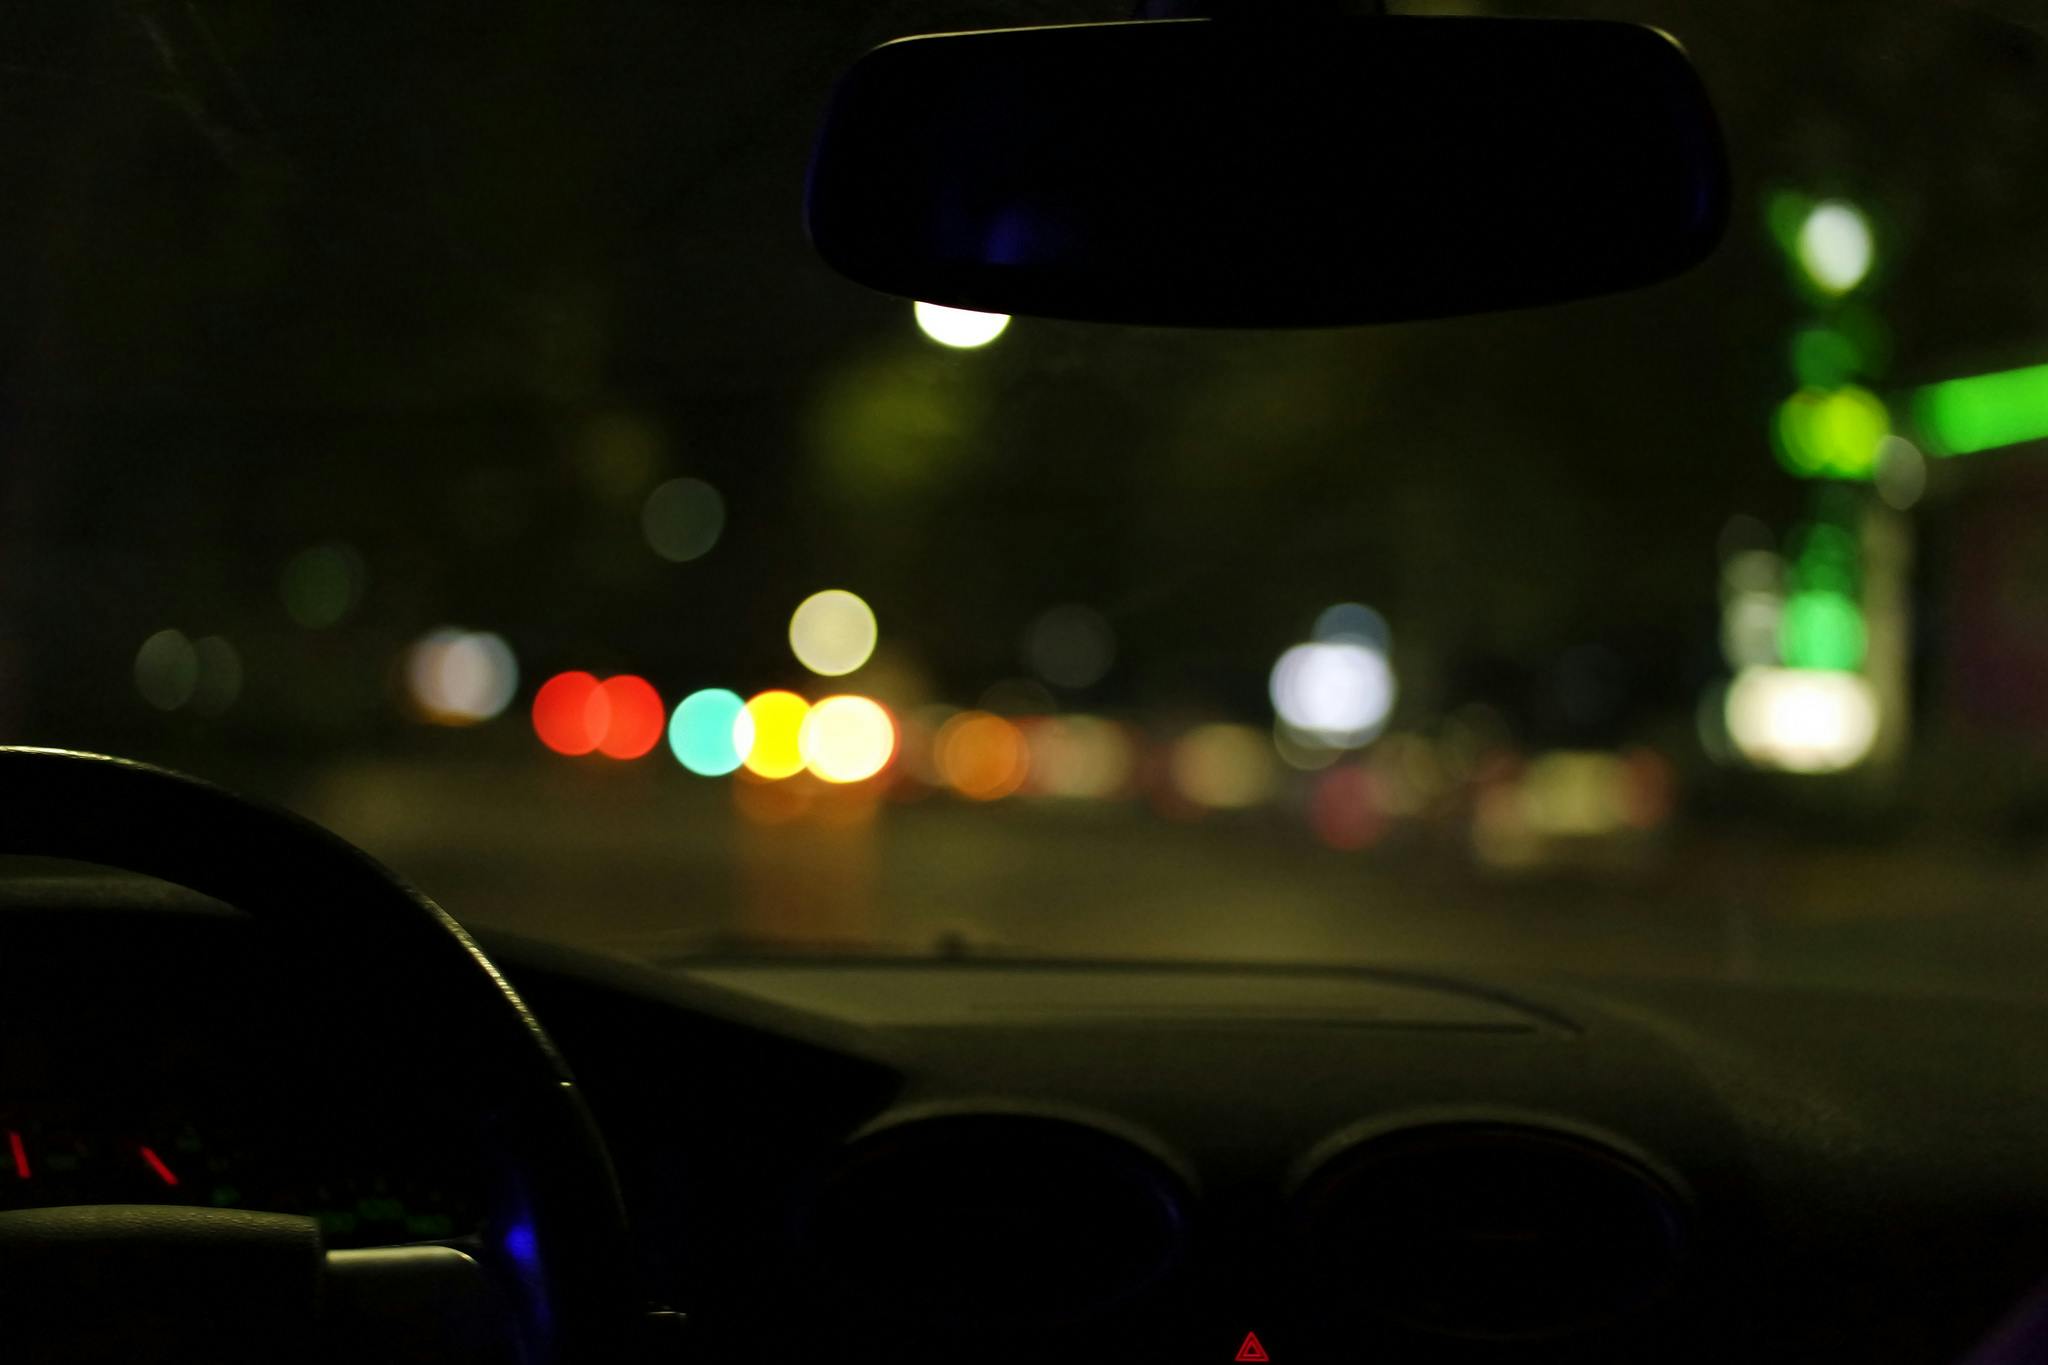 A shot from inside a car | Source: Pexels